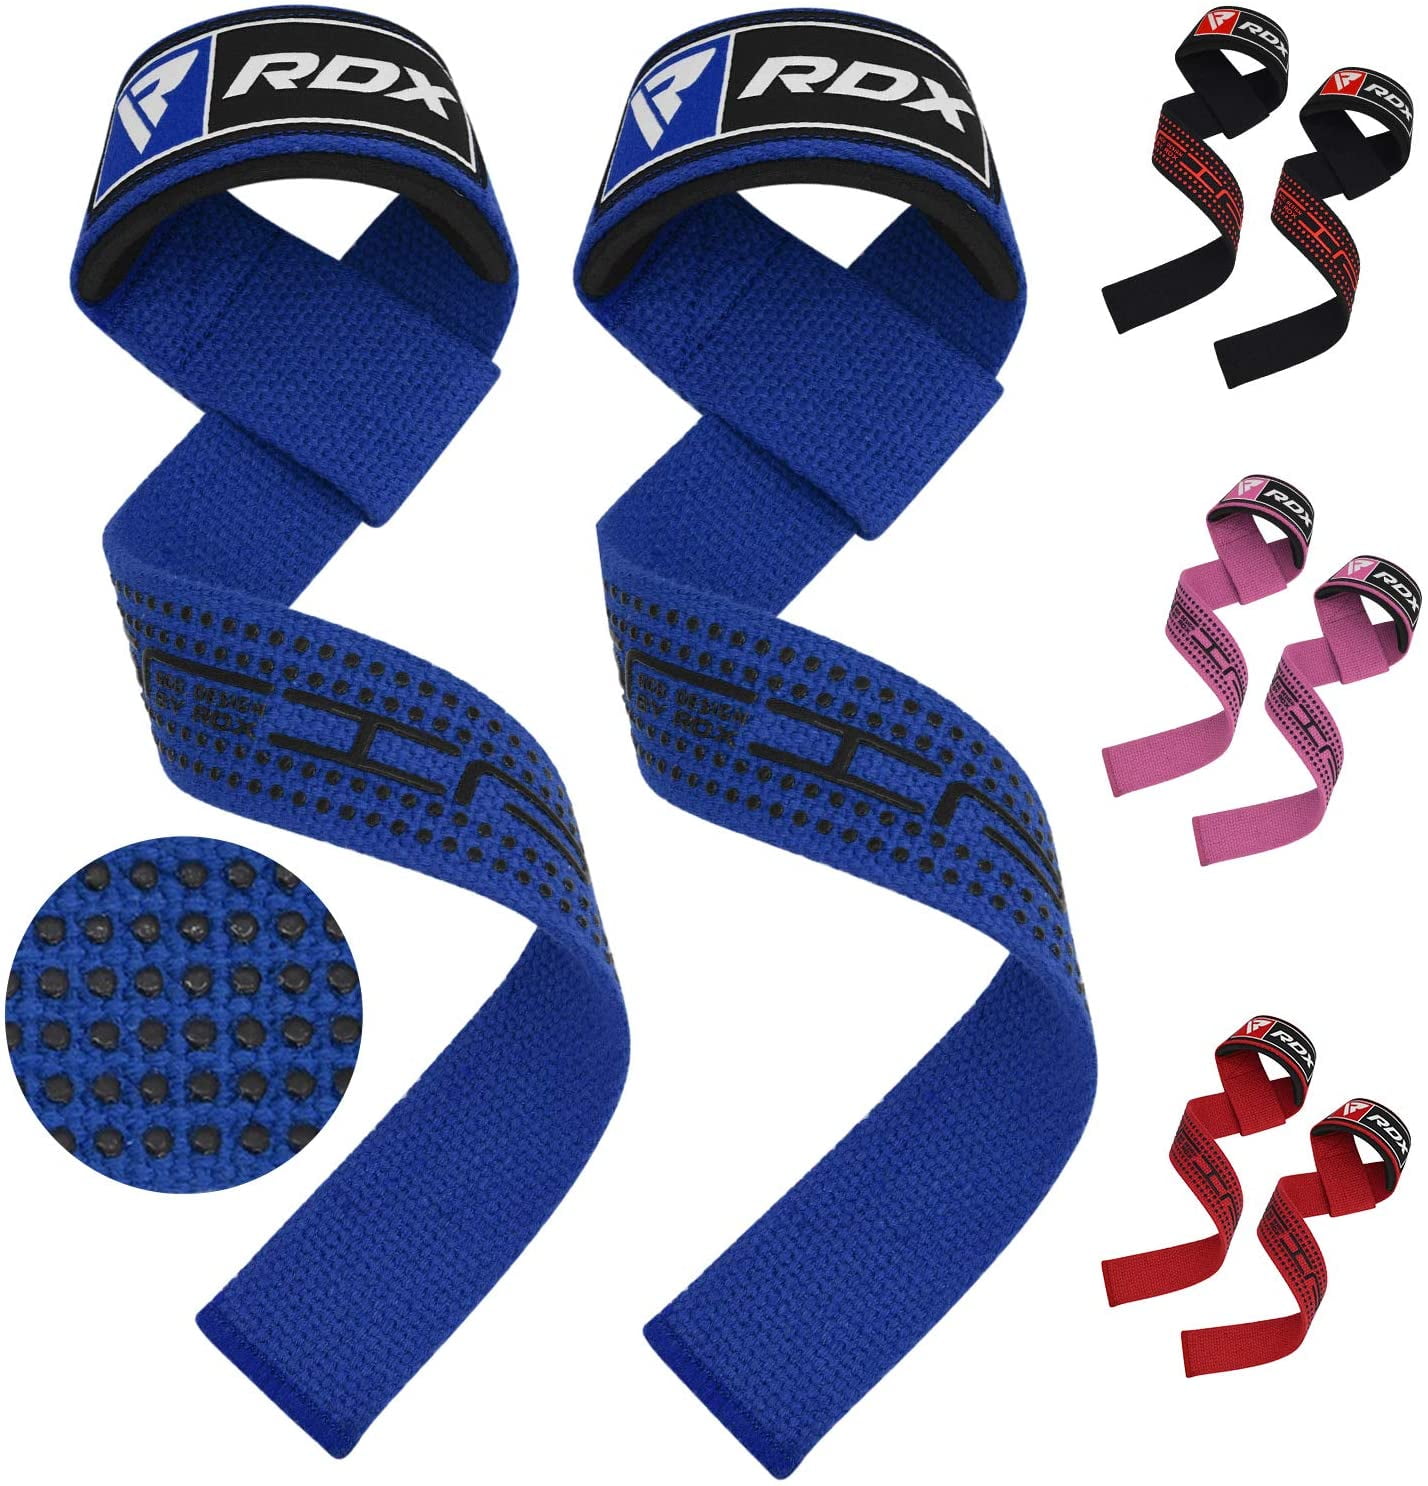 Bodybuilding Workout and Xfit Exercise Deadlifts Elasticated Straps for Strength Training Powerlifting Gymnastics RDX Weight Lifting Wrist Support Wraps 